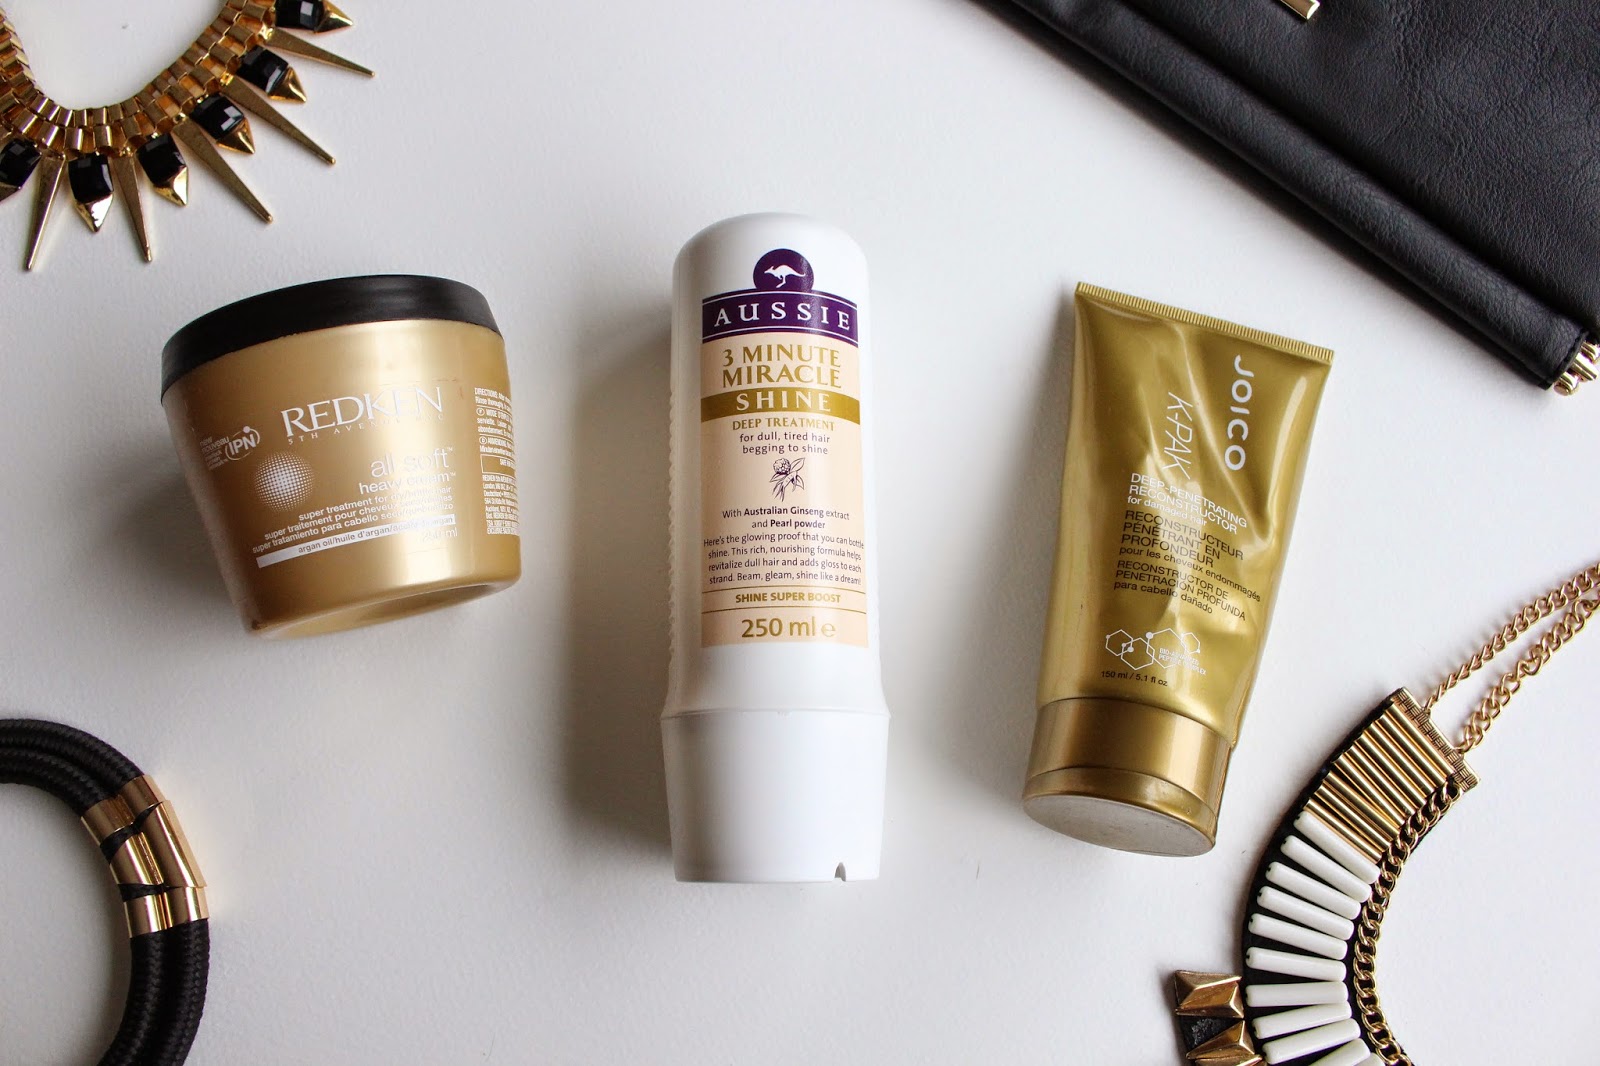 My hair care favourites